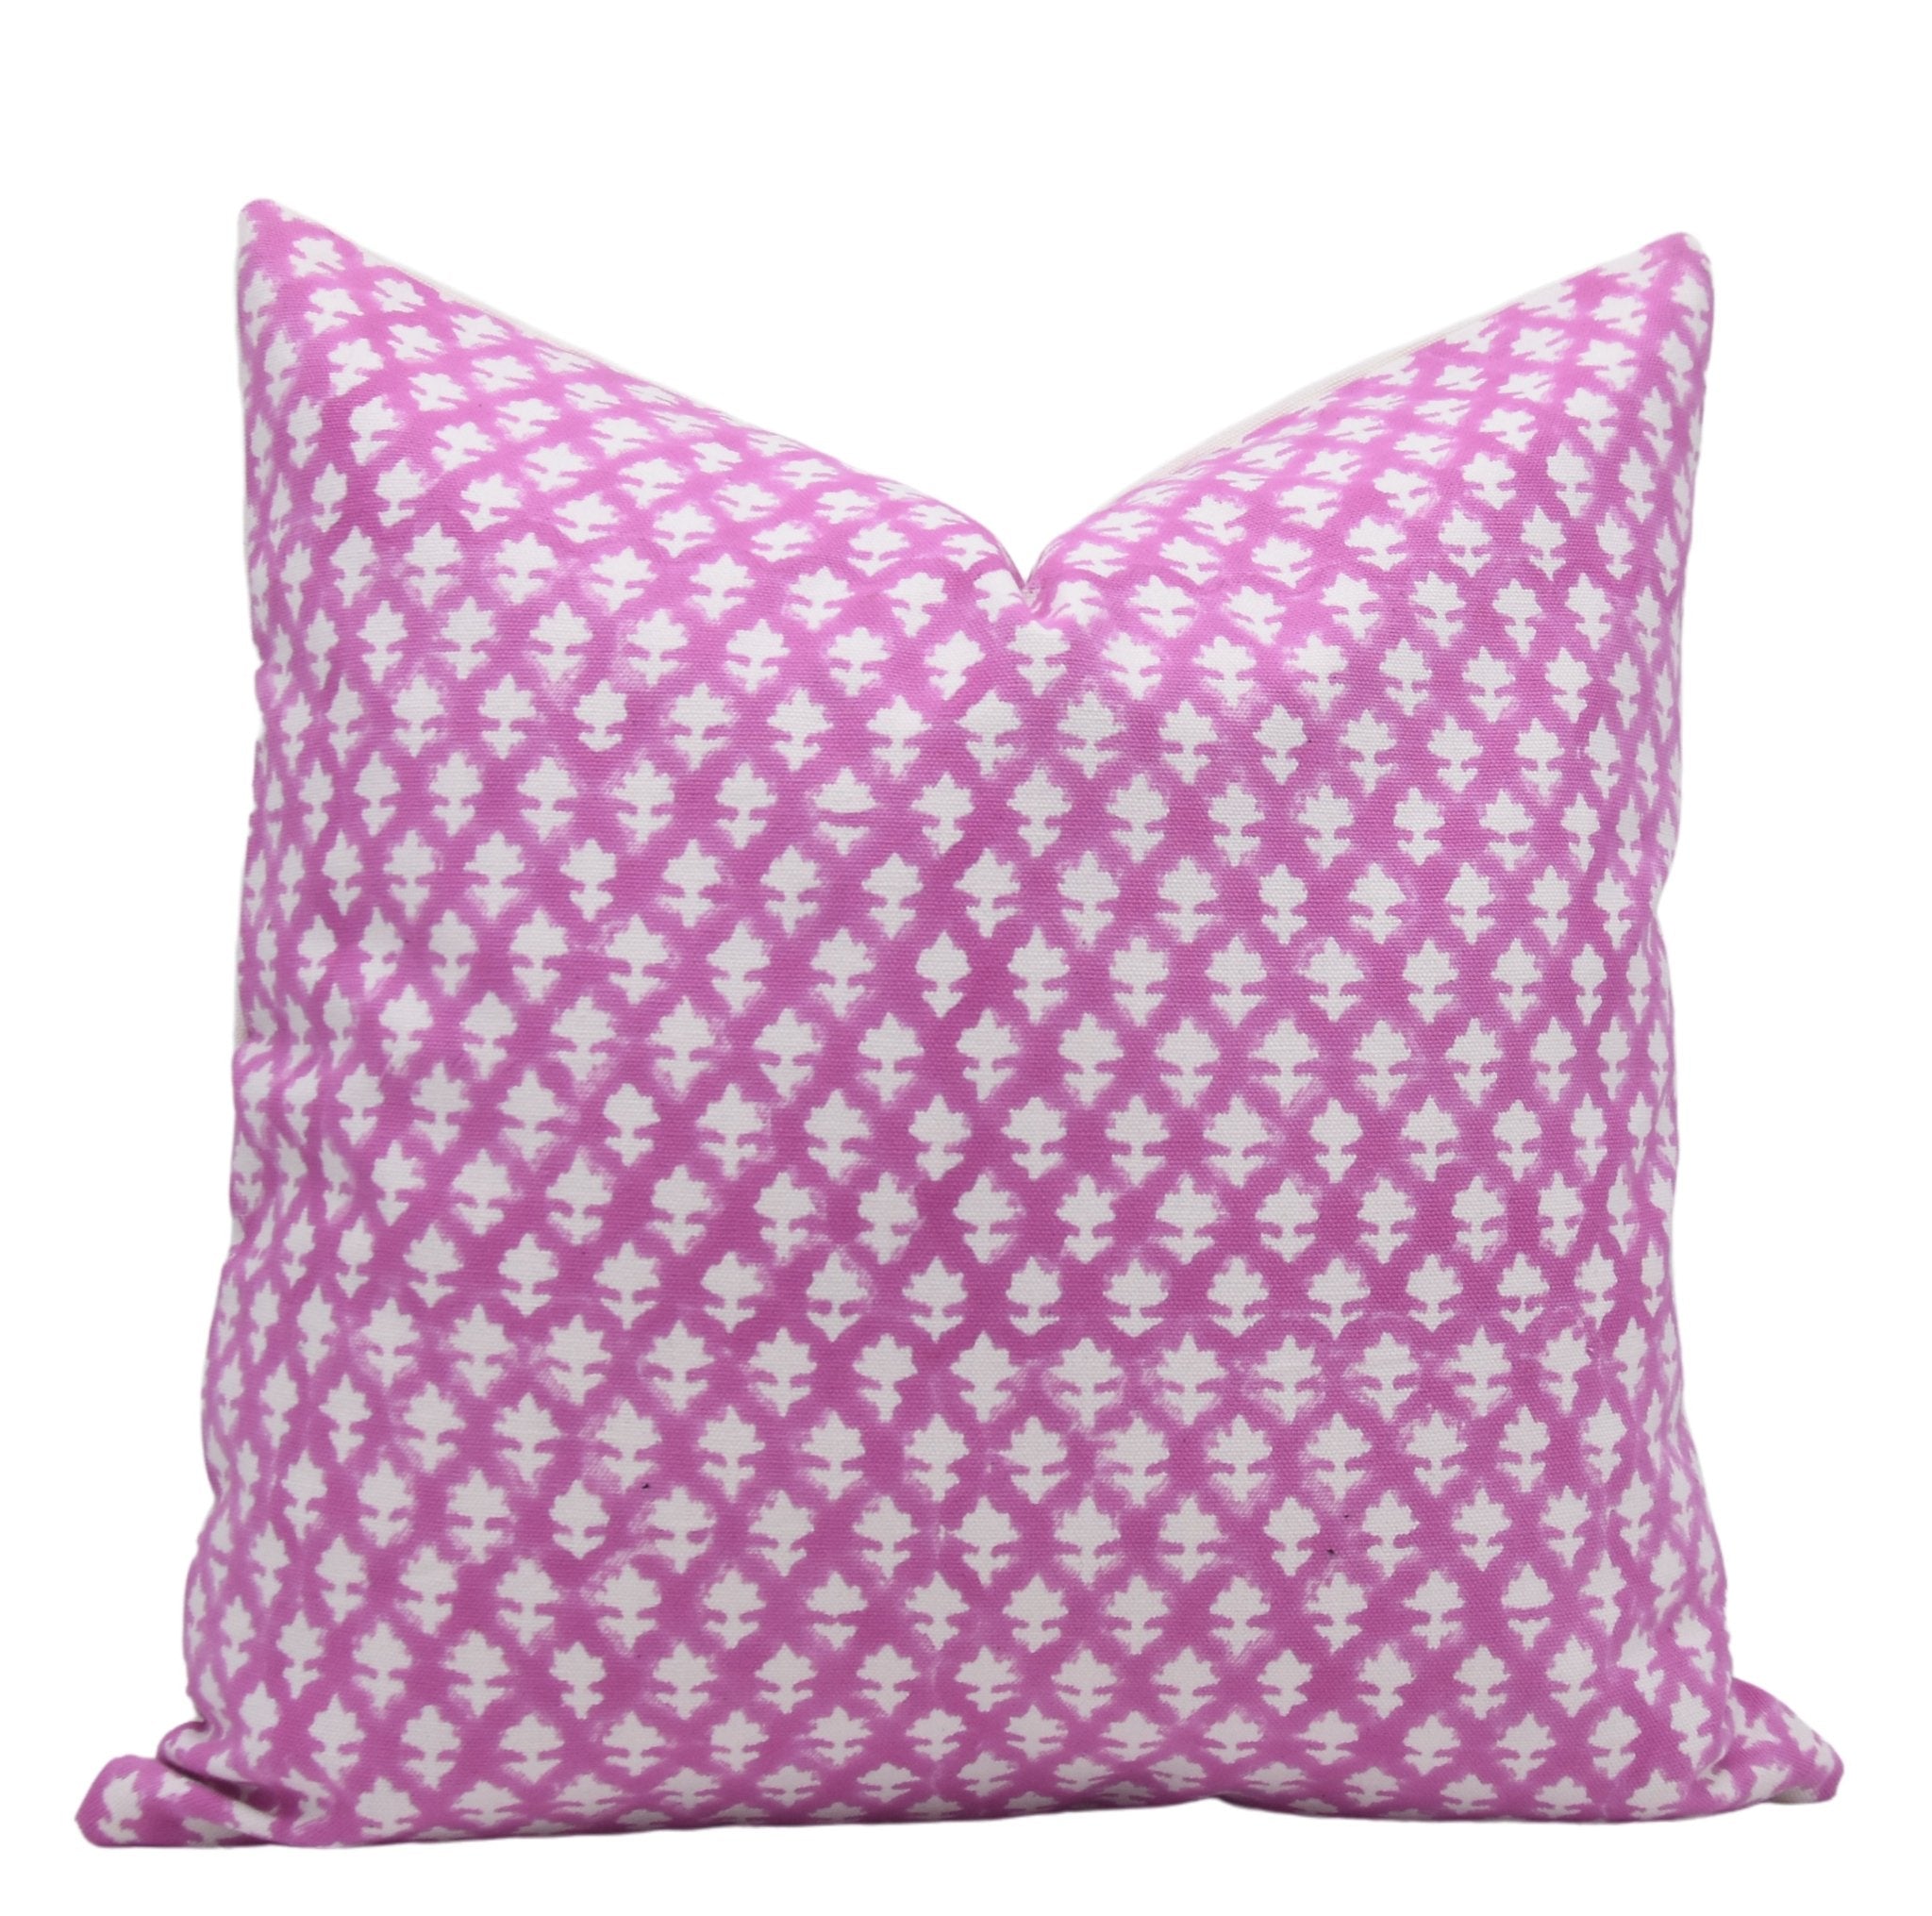 PINKCITY JAAL PILLOW COVER - FABDIVINE LLCPINKCITY JAAL PILLOW COVERTCW Pillow CoverFABDIVINE LLC